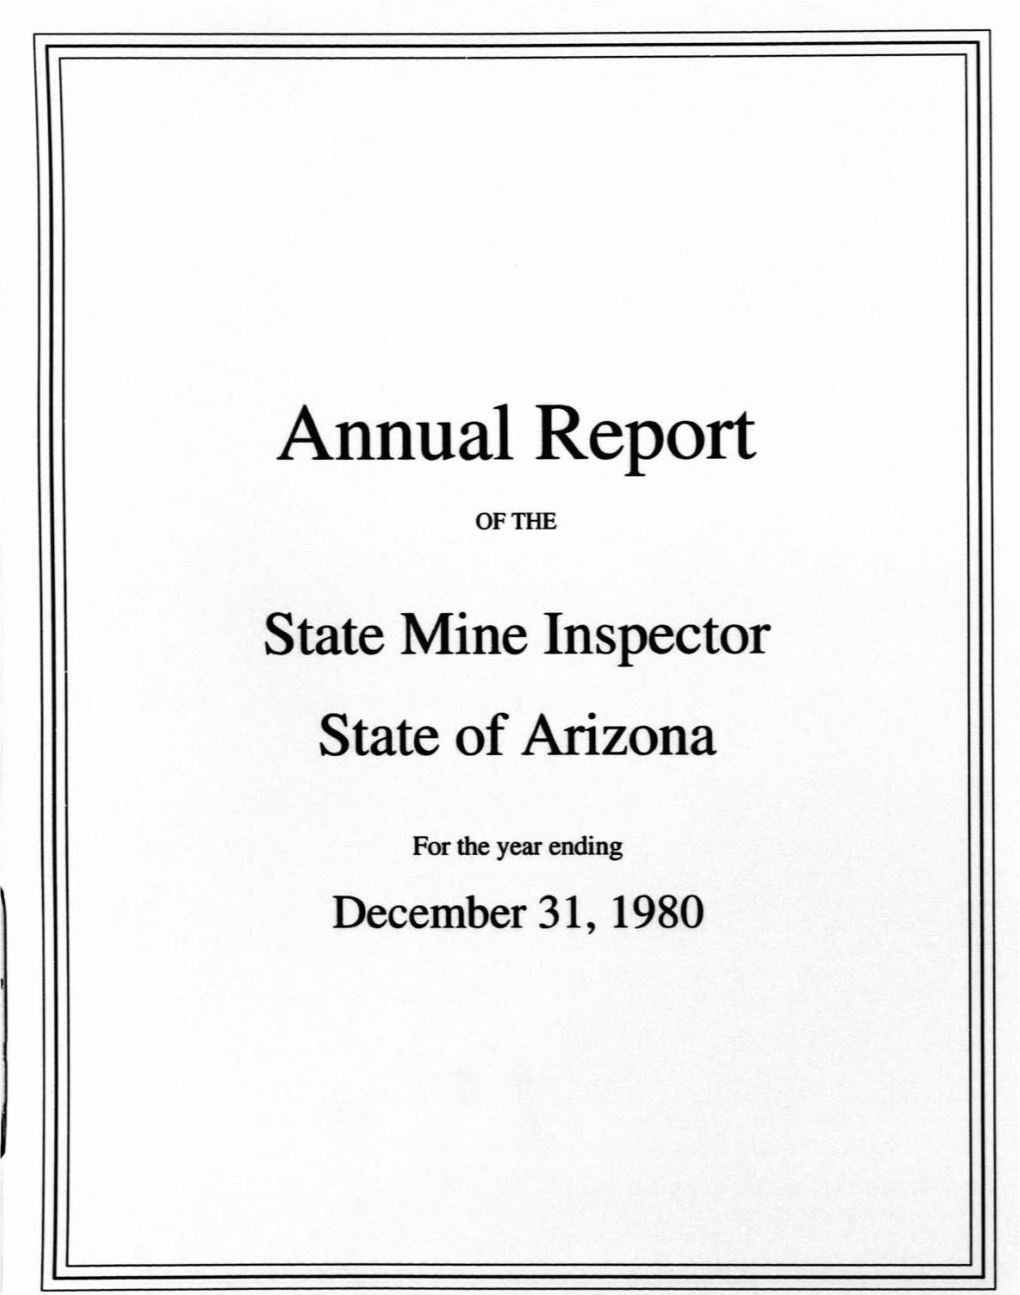 Annual Report of THE